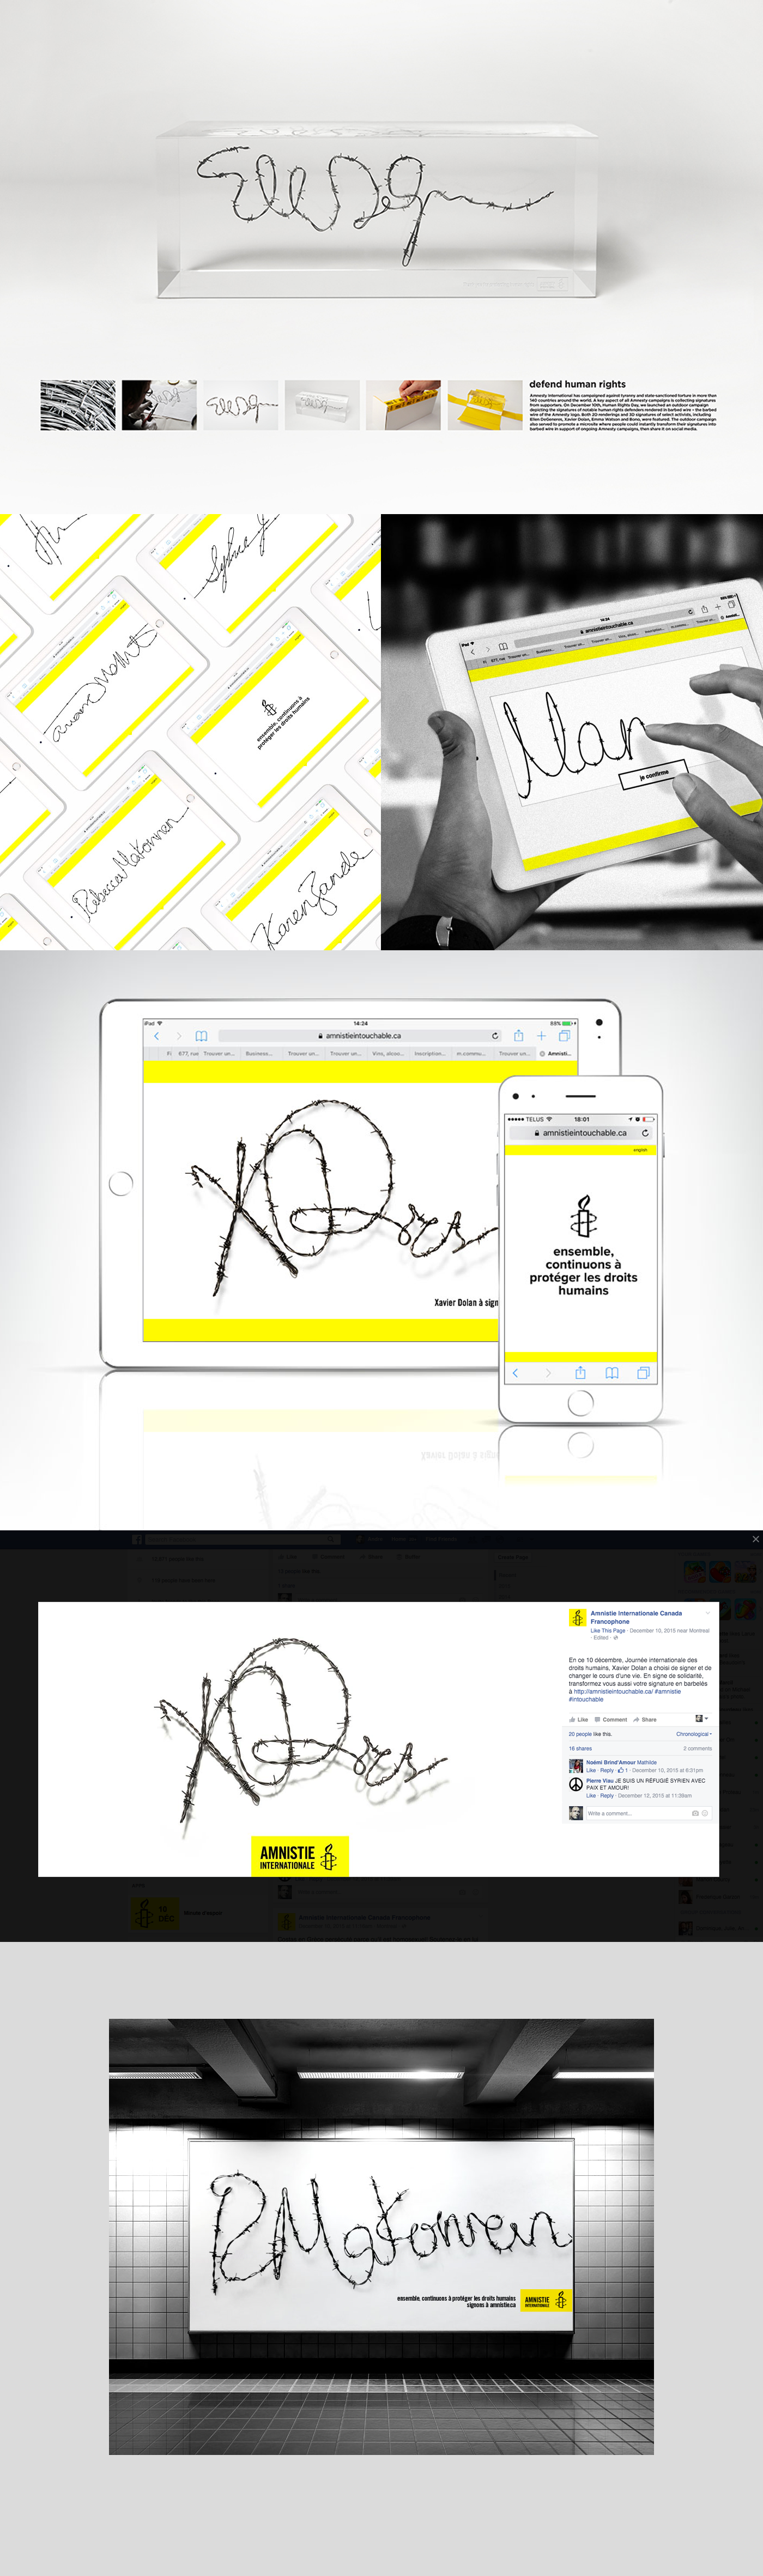 UX design charity Human rights web application mobile design